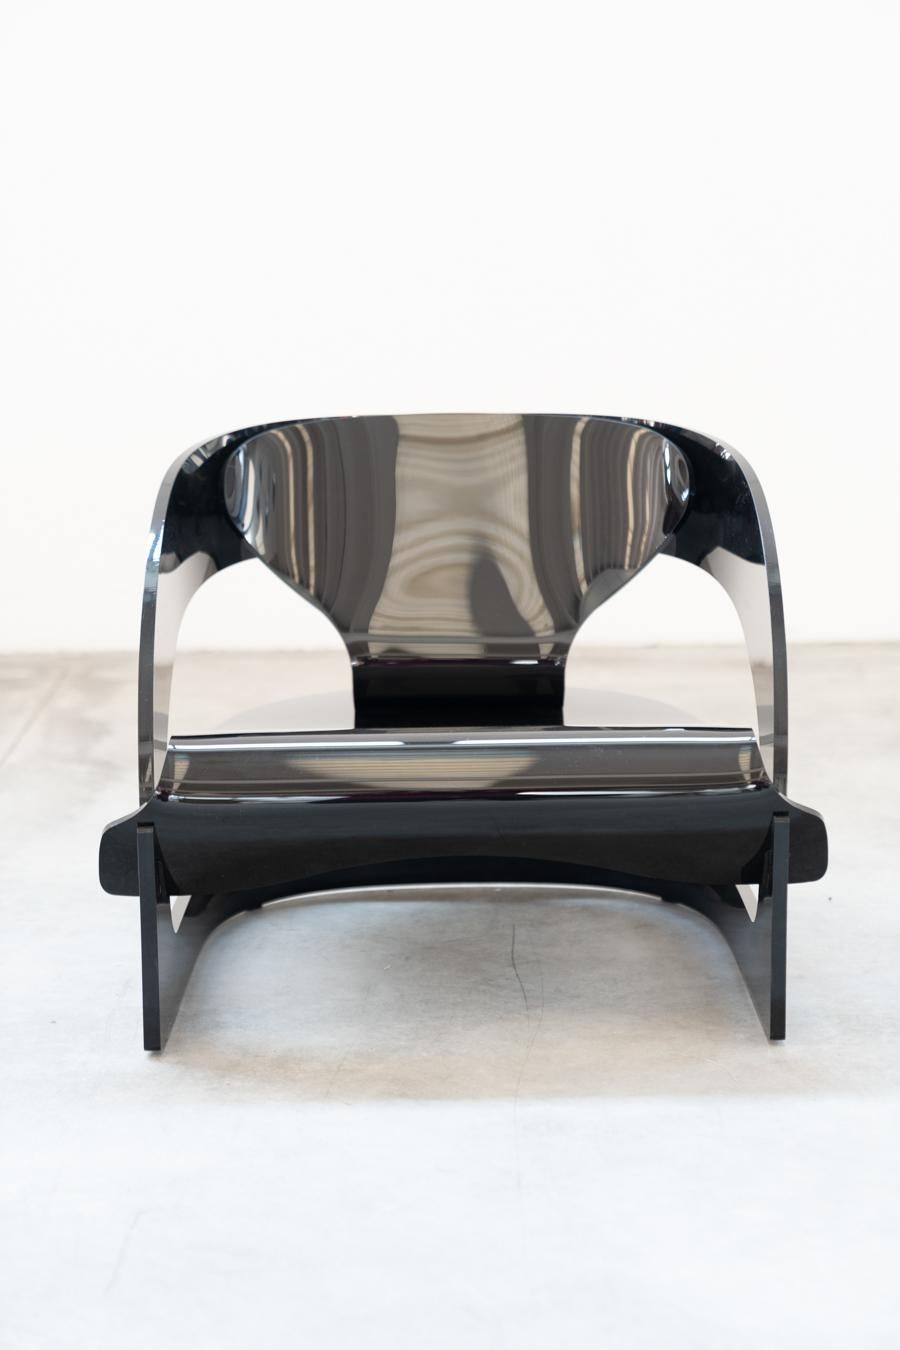 Colombo Joe armchair for Kartell, 1980s
Mod.4801, limited numbered series no.217. Structure formed by assembling 3 polycarbonate elements and black rubber stop. Columbus was en extreme defender of the unity between structure and material. This